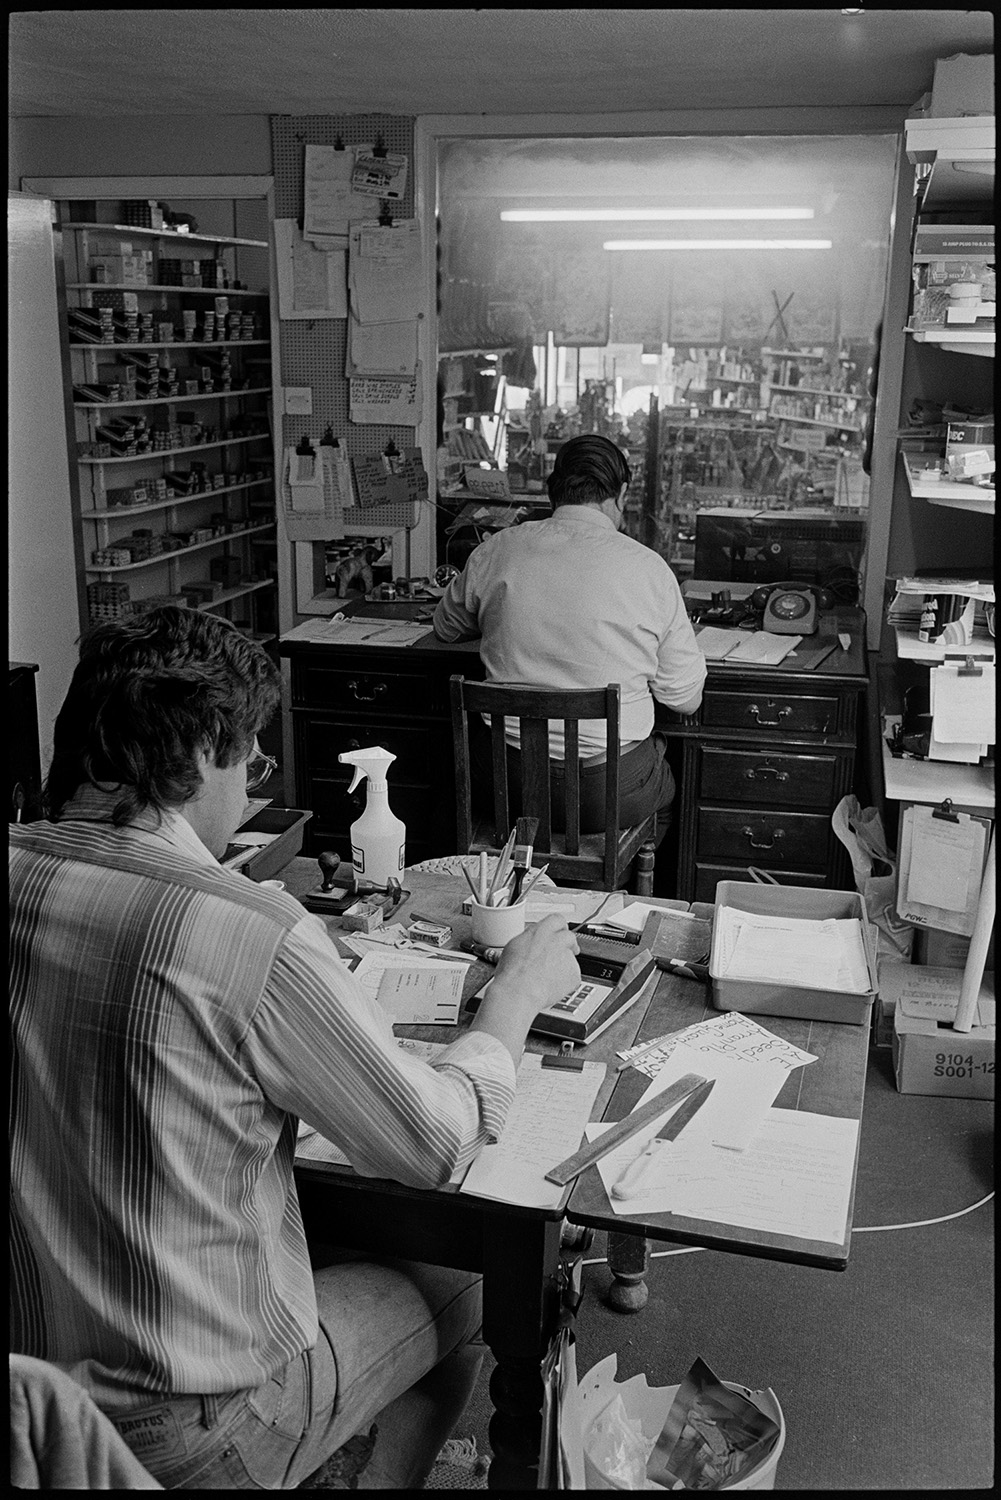 Interior of ironmongers shop. Man working at desk doing accounts. Fine dresser.
[Rear view of Tim Kingdon and Alec Brownscombe working in the back office of A E Kingdon ironmongers shop in Fore Street, Chulmleigh. The desks are covered with papers.]